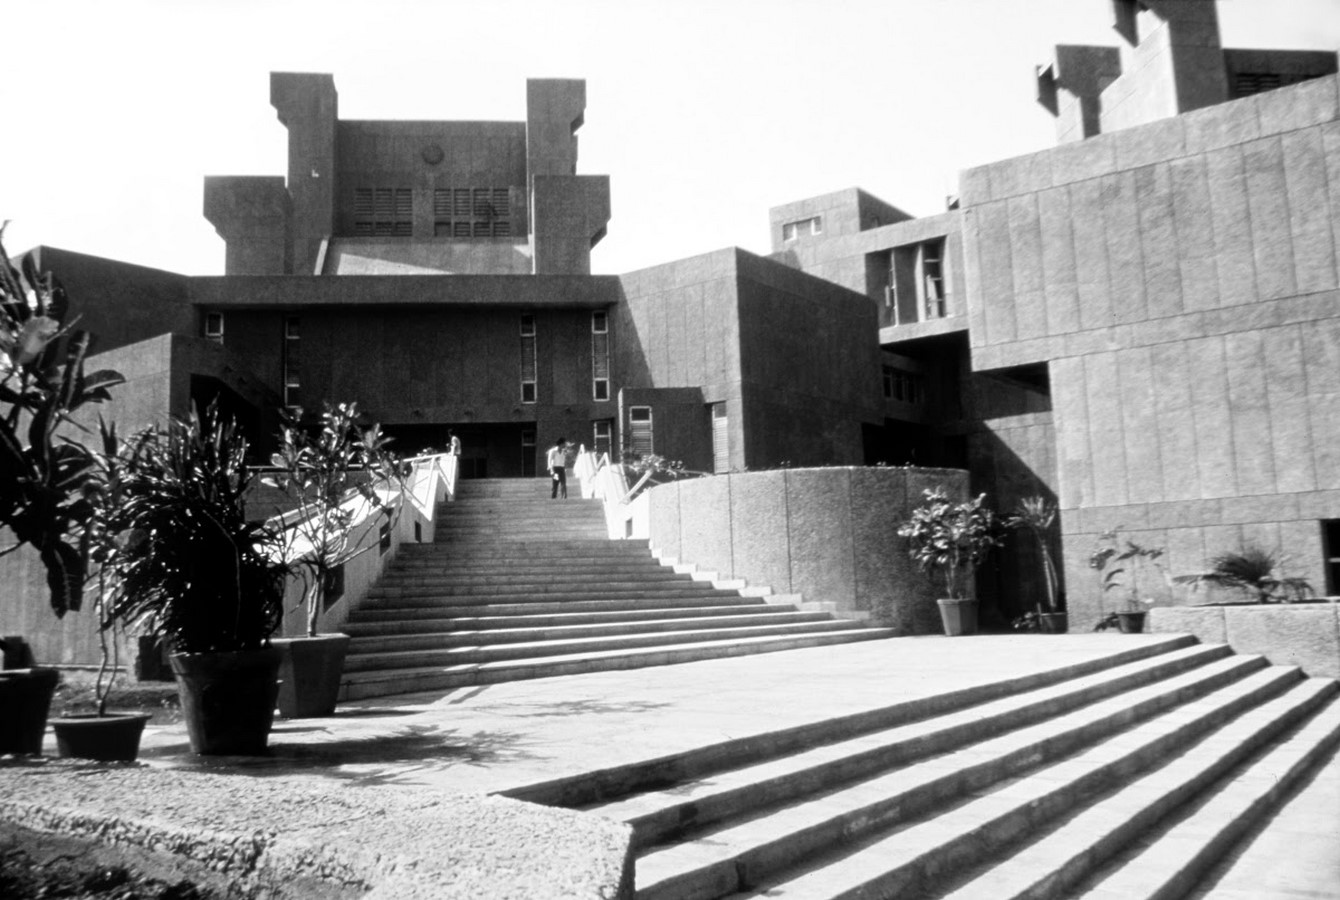 Bauhaus style of architecture in India - Sheet7